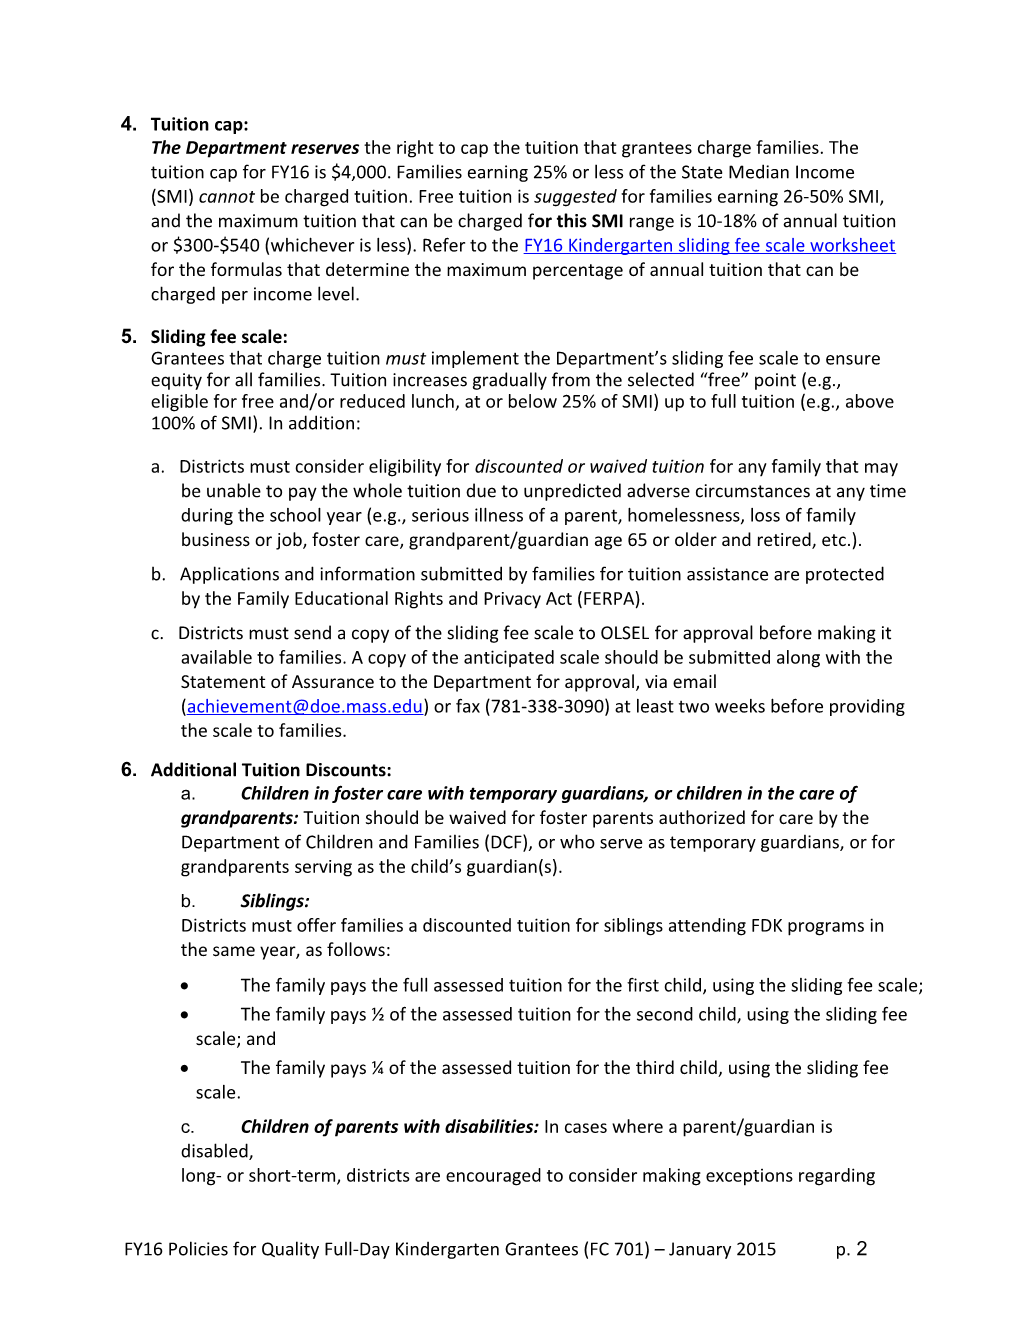 FY16 Quality Full-Day Kindergarten Grant Tuition and Lottery Policies - January 2014 (For